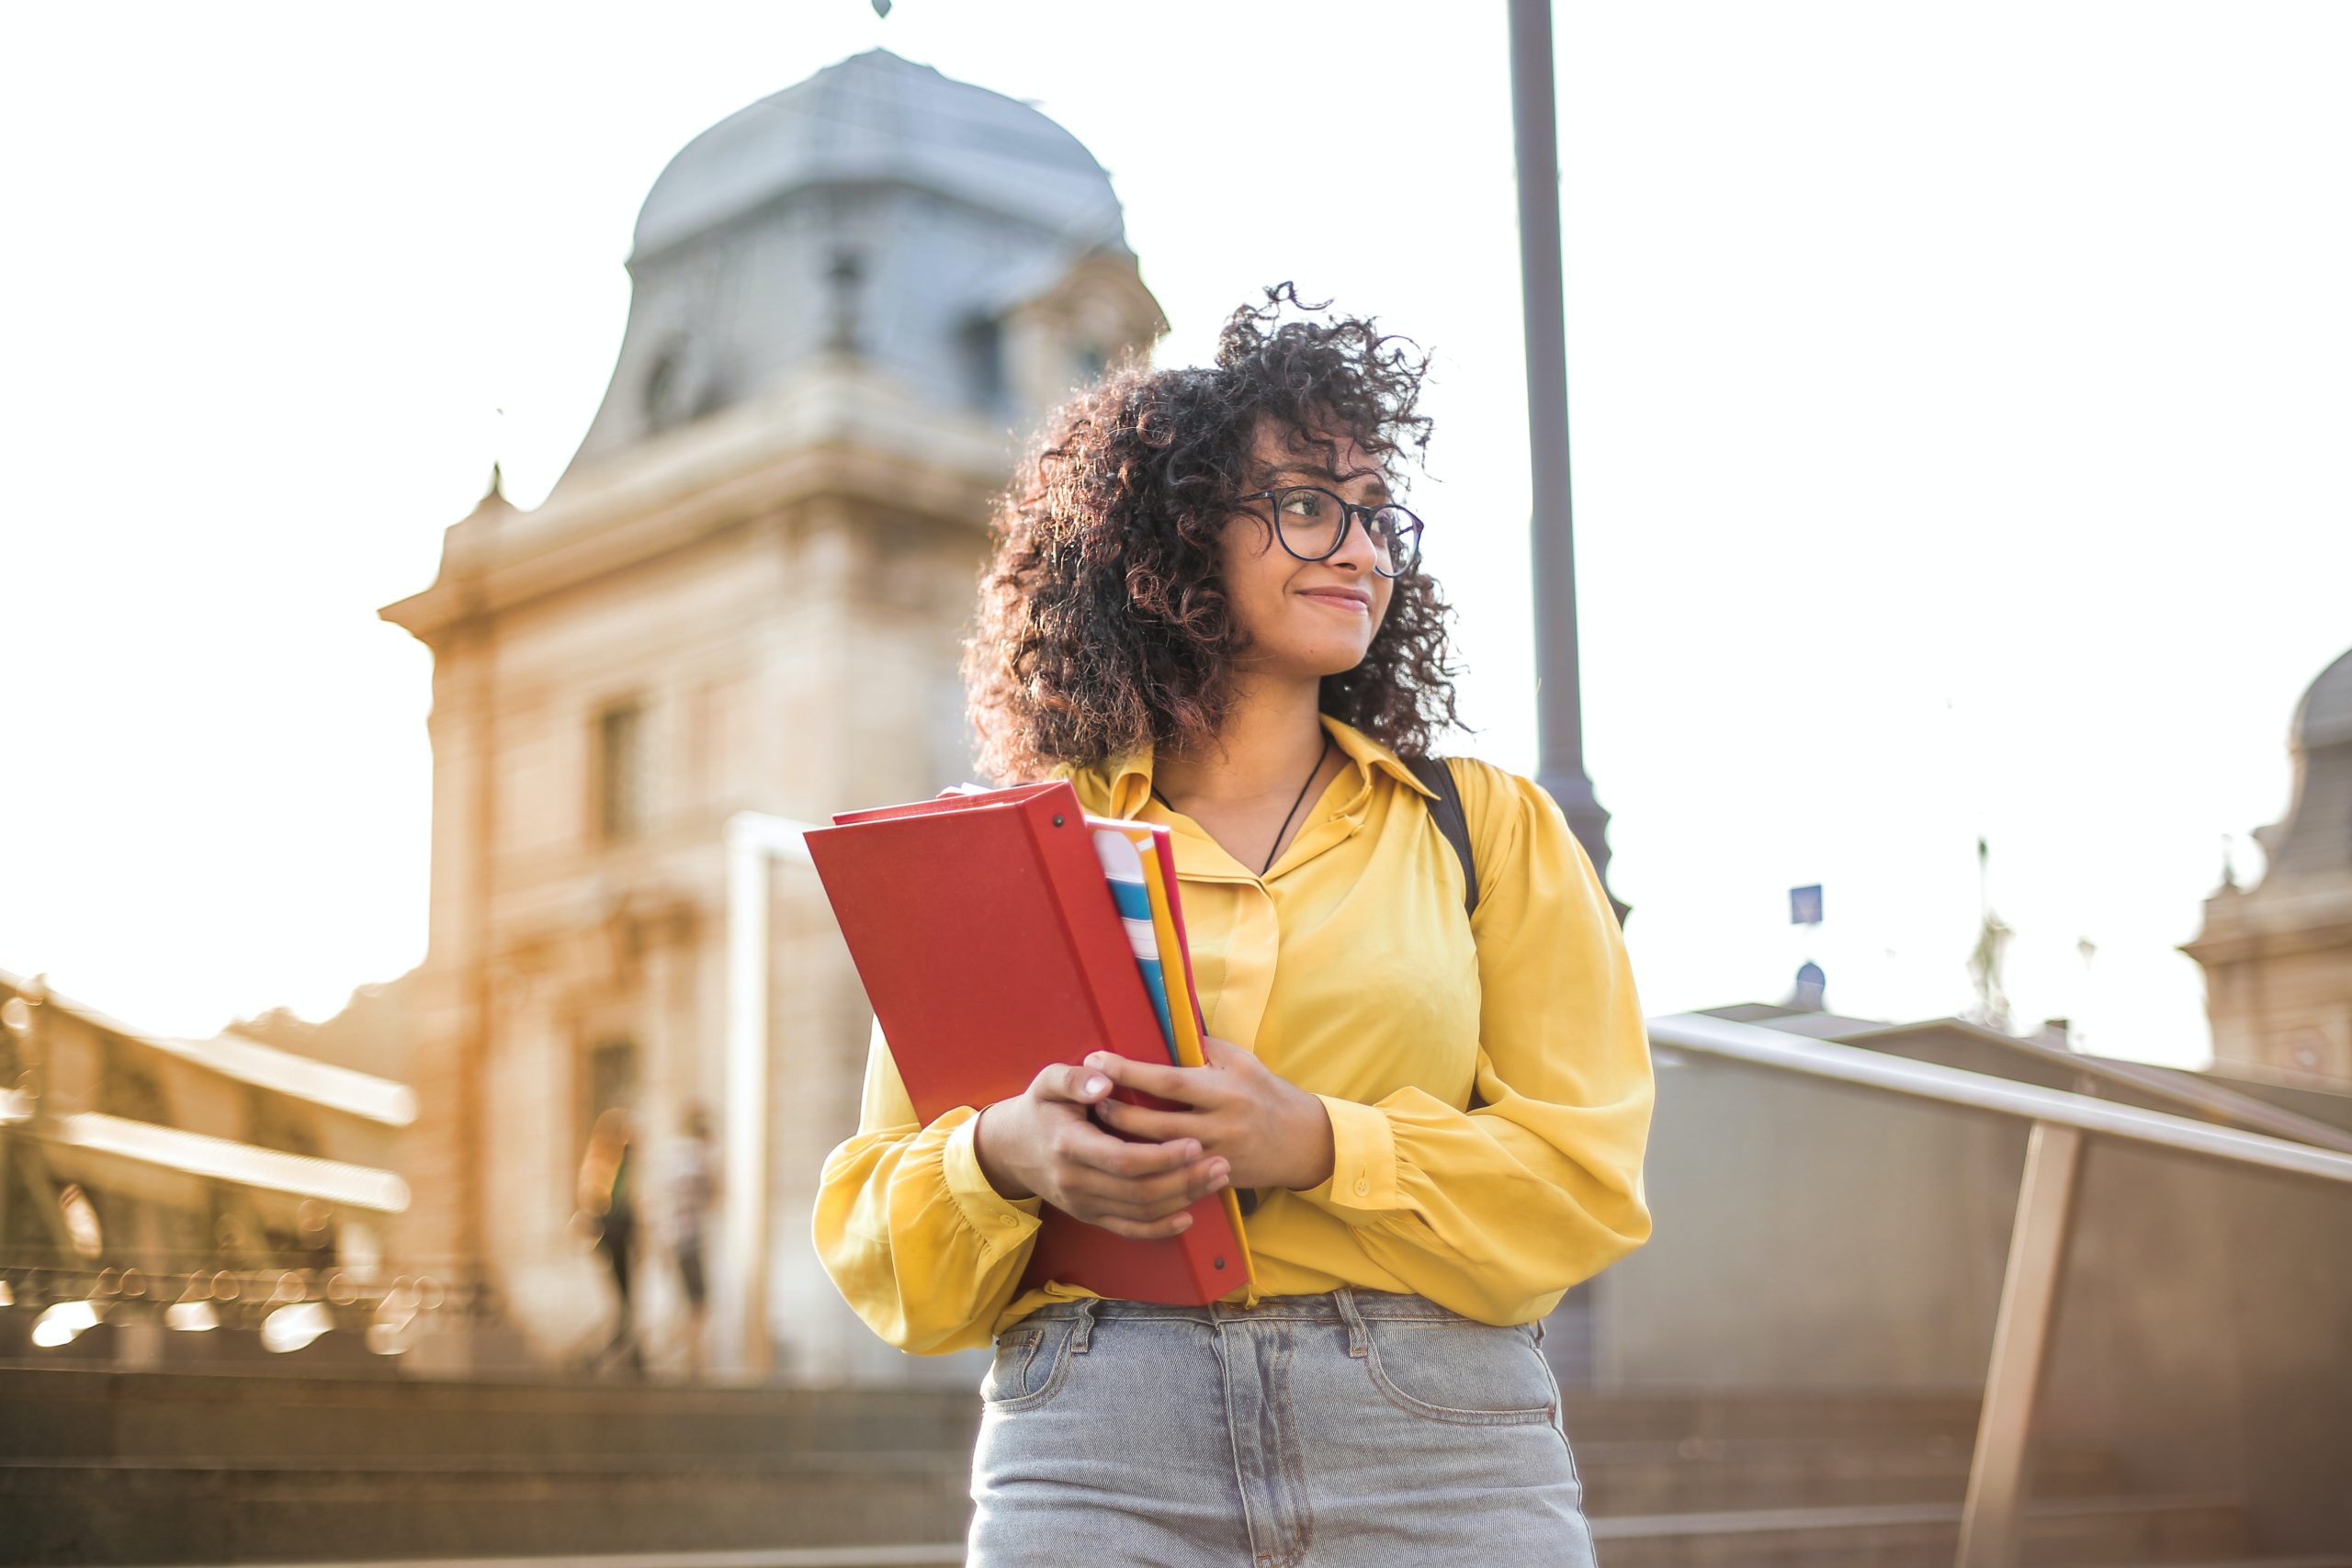 college student standing on outdoor steps, holding books and looking out with a positive facial expression